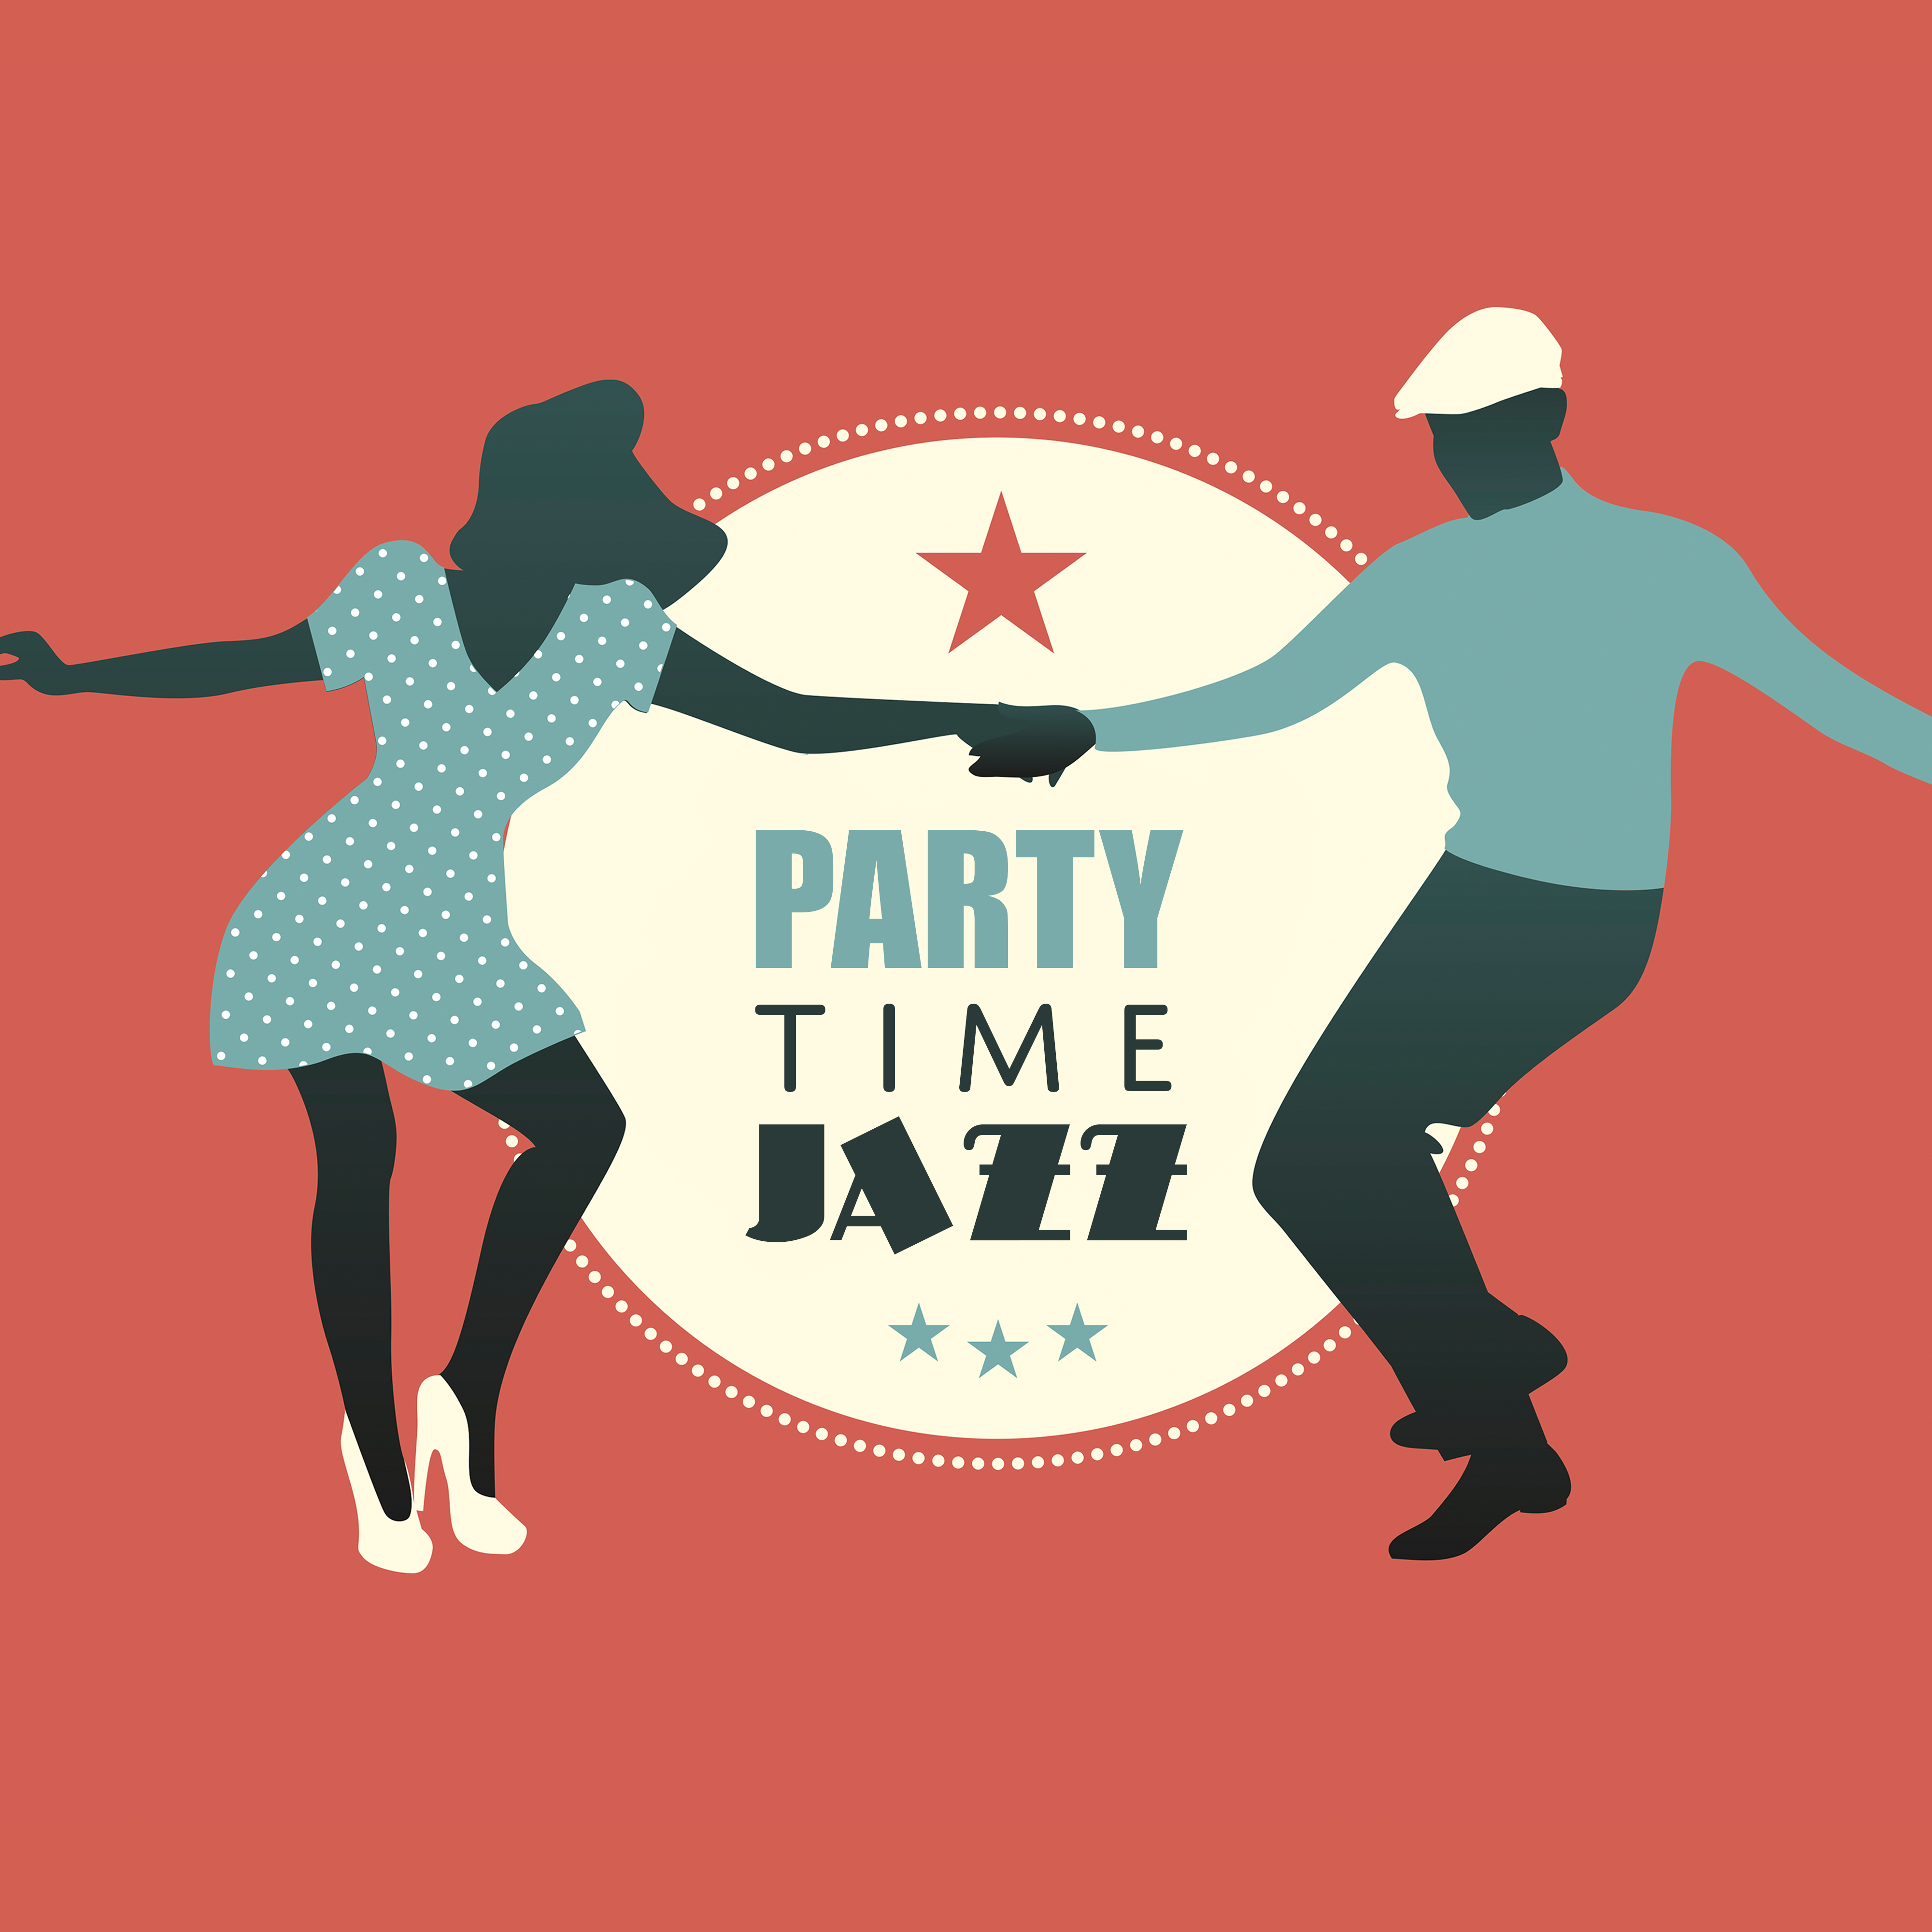 Party Time Jazz